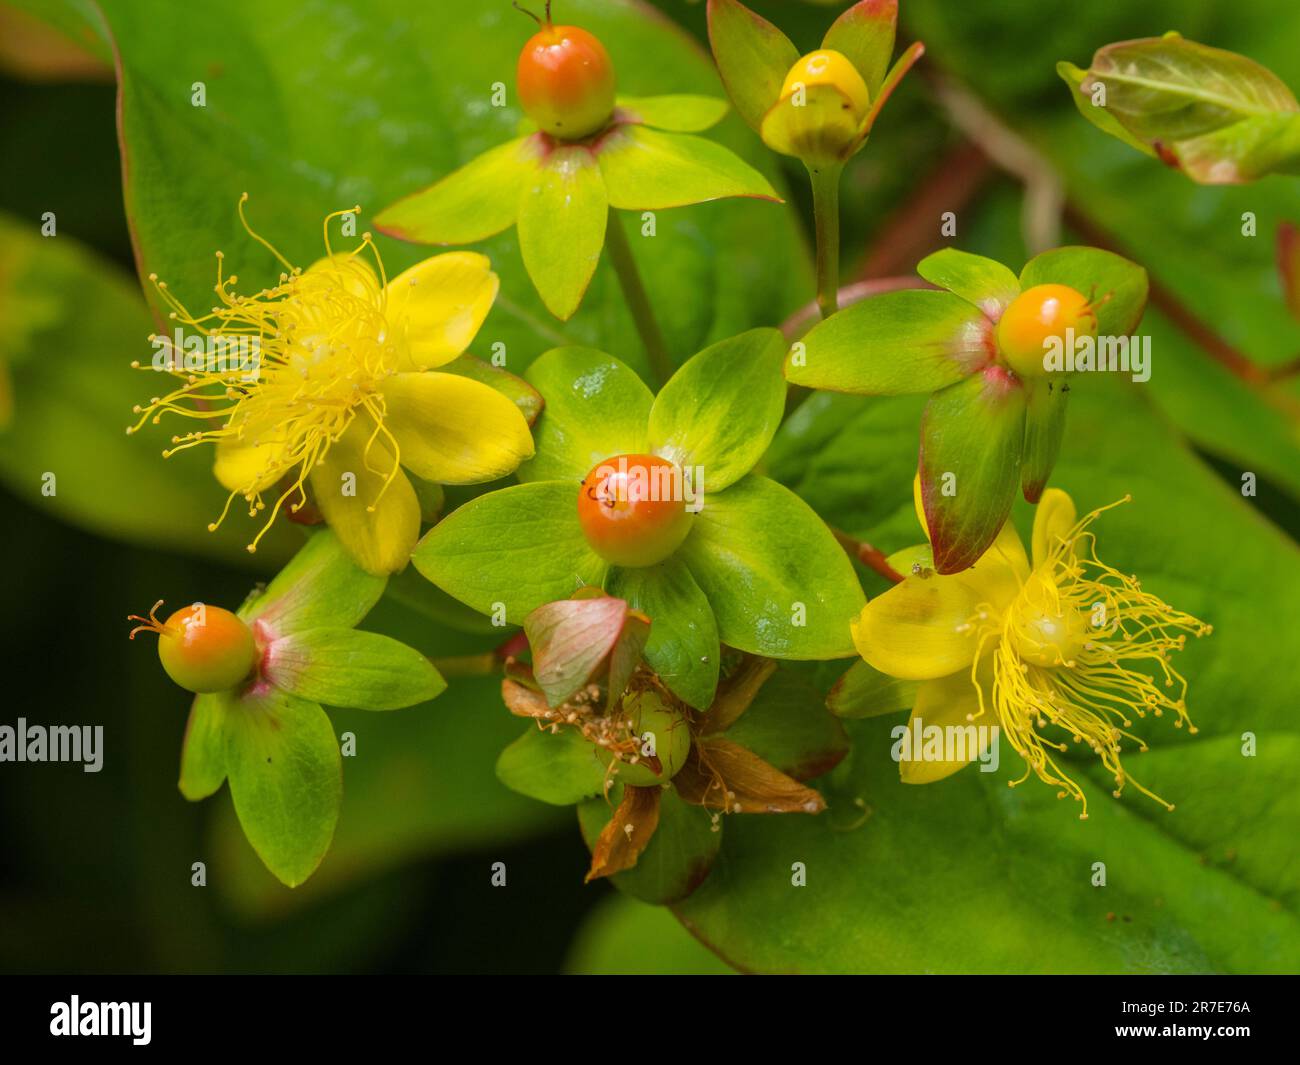 Yellow flowers and developing berries of the UK native shrubby Tutsan, Hypericum androsaemum, often grown as a garden plant Stock Photo